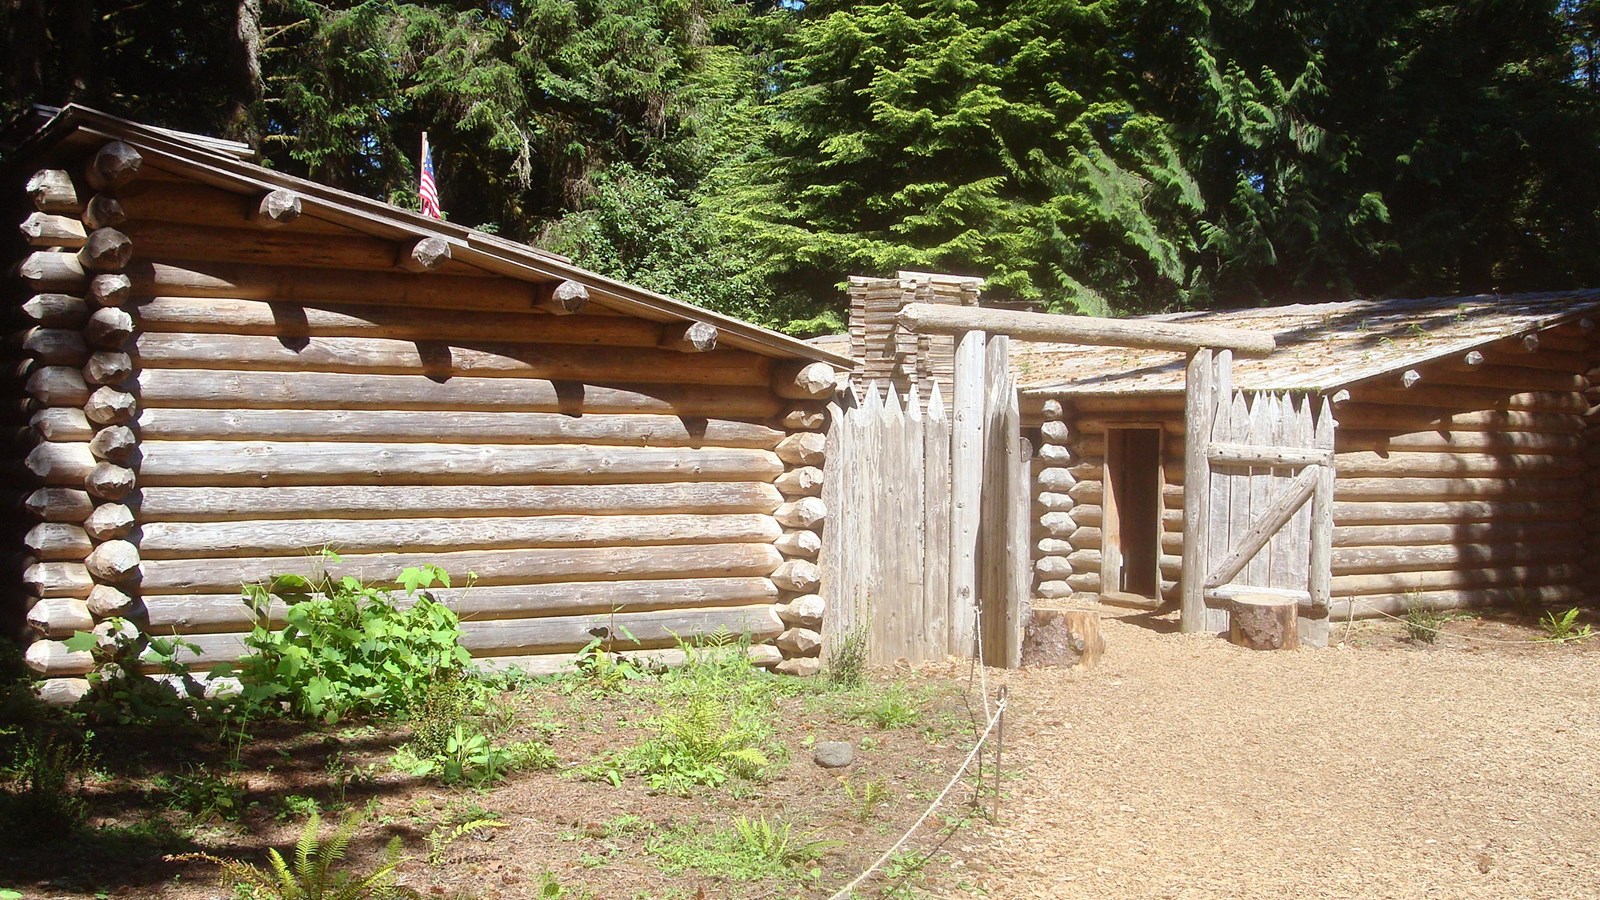 Wooden fort with vertical and horizontal posts